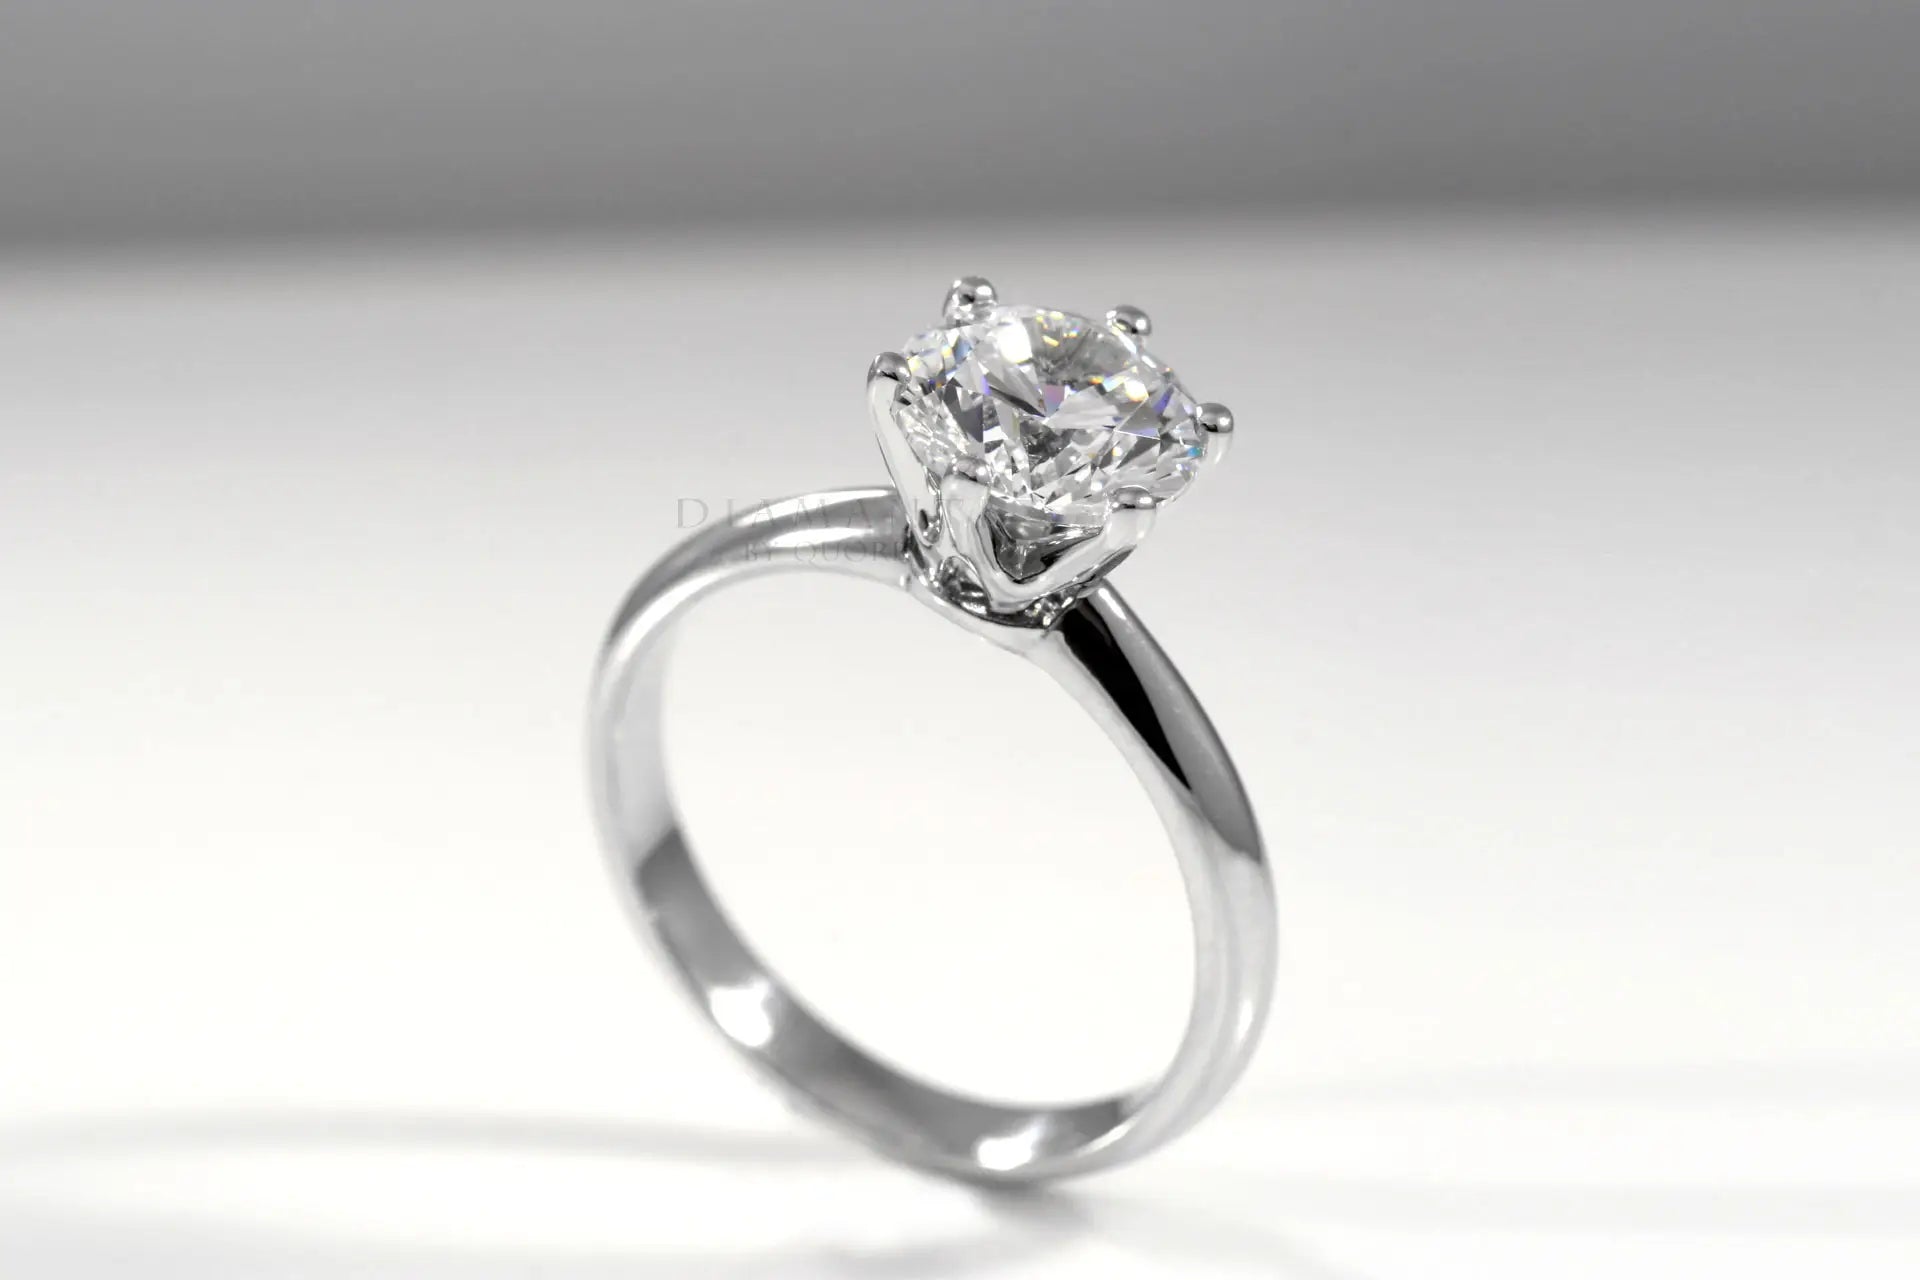 18k white gold six prong tiffany inspired round lab grown diamond solitaire engagement ring